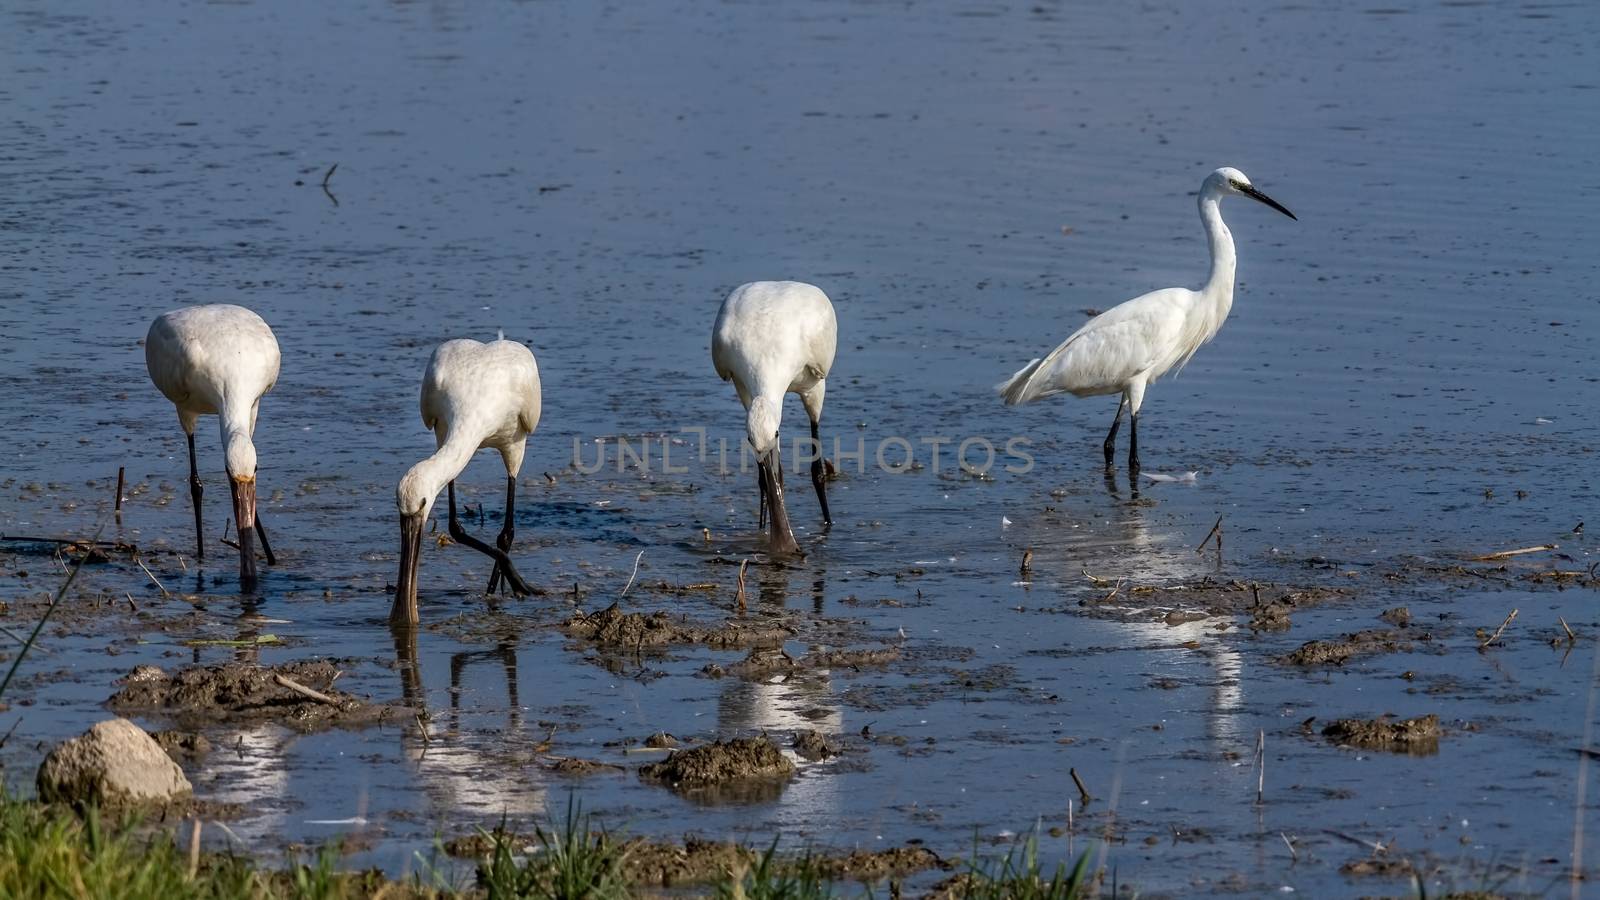 Group of spoonbill birds by Digoarpi